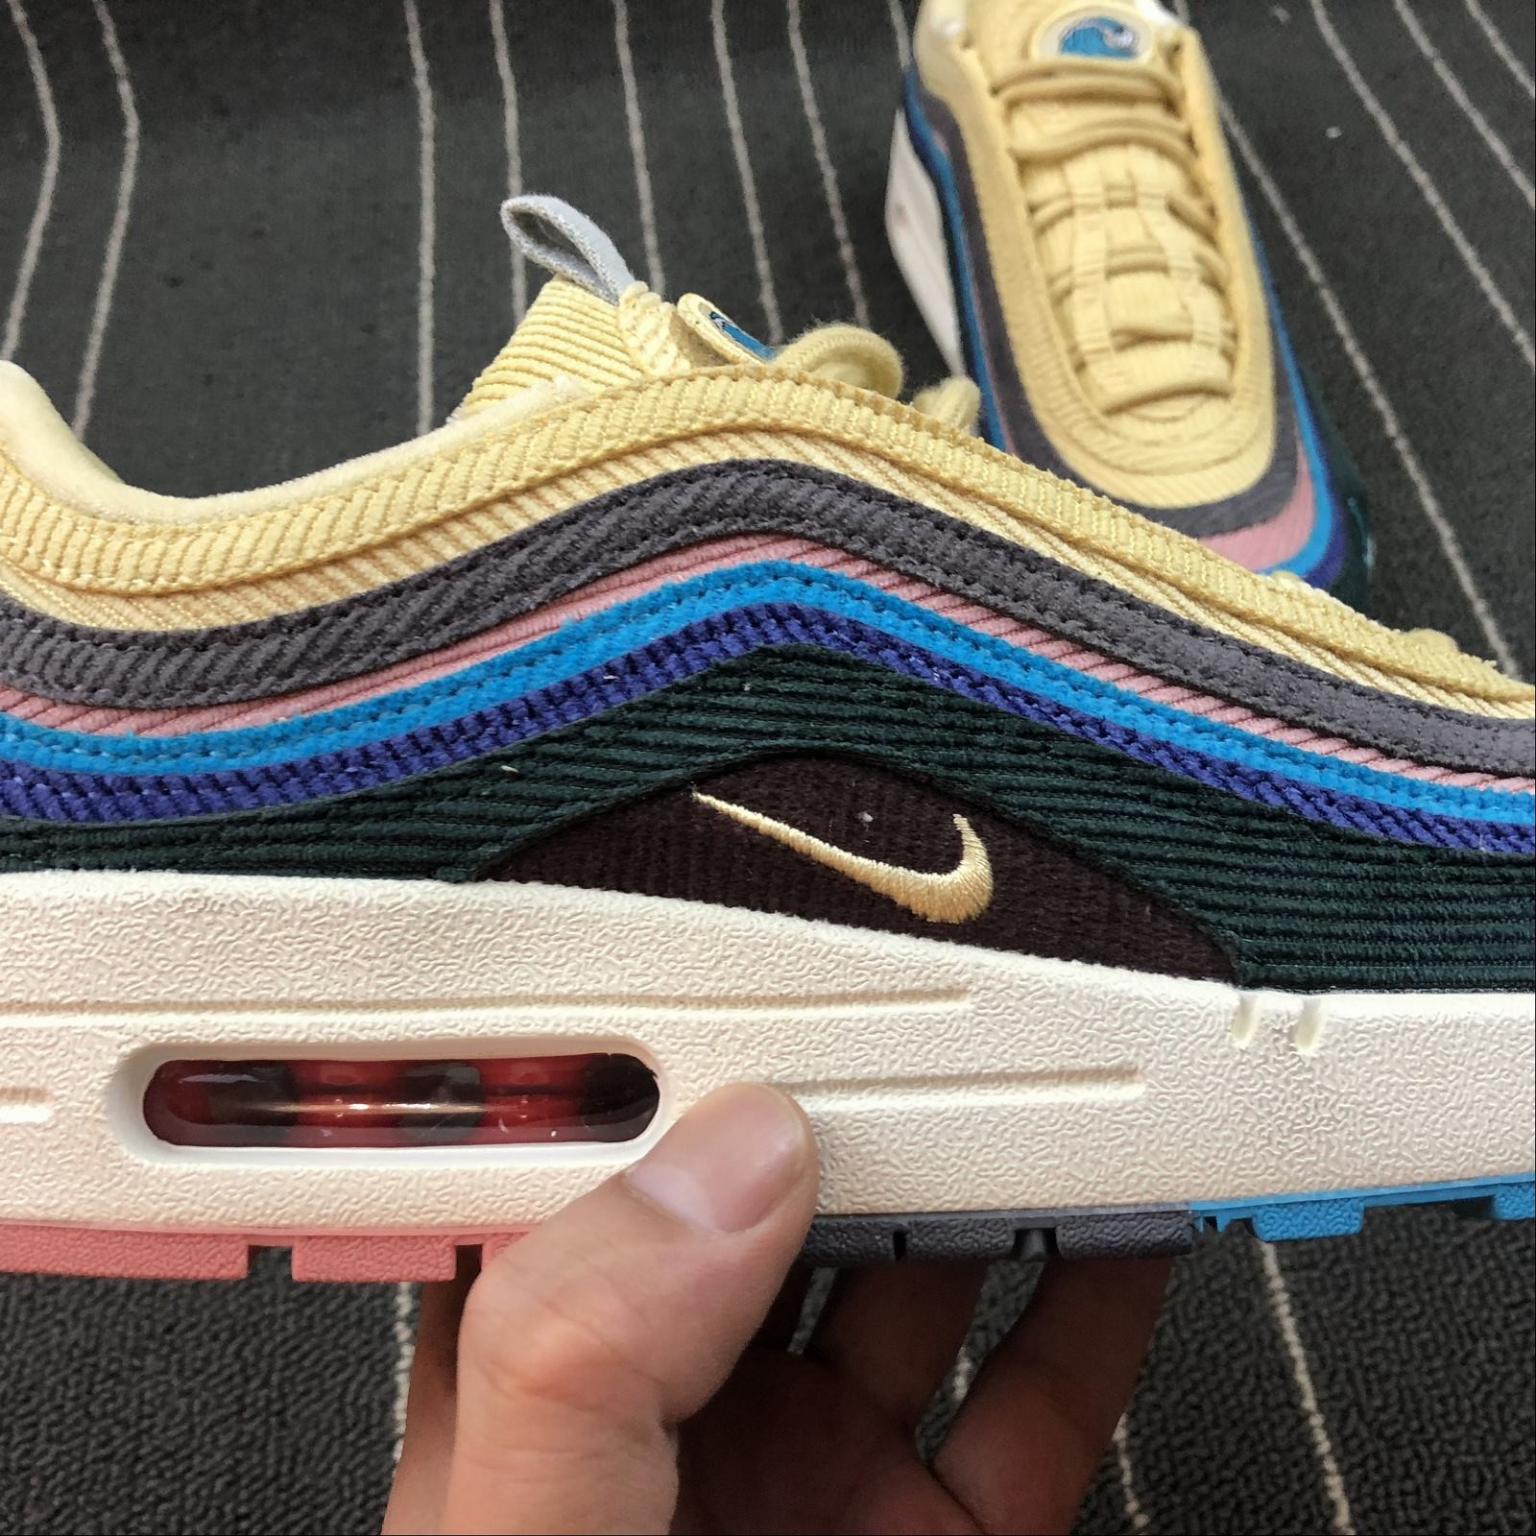 Nike Air Max 1/97 Sean Wotherspoon in 87068 Corigliano-Rossano for €200.00  for sale | Shpock